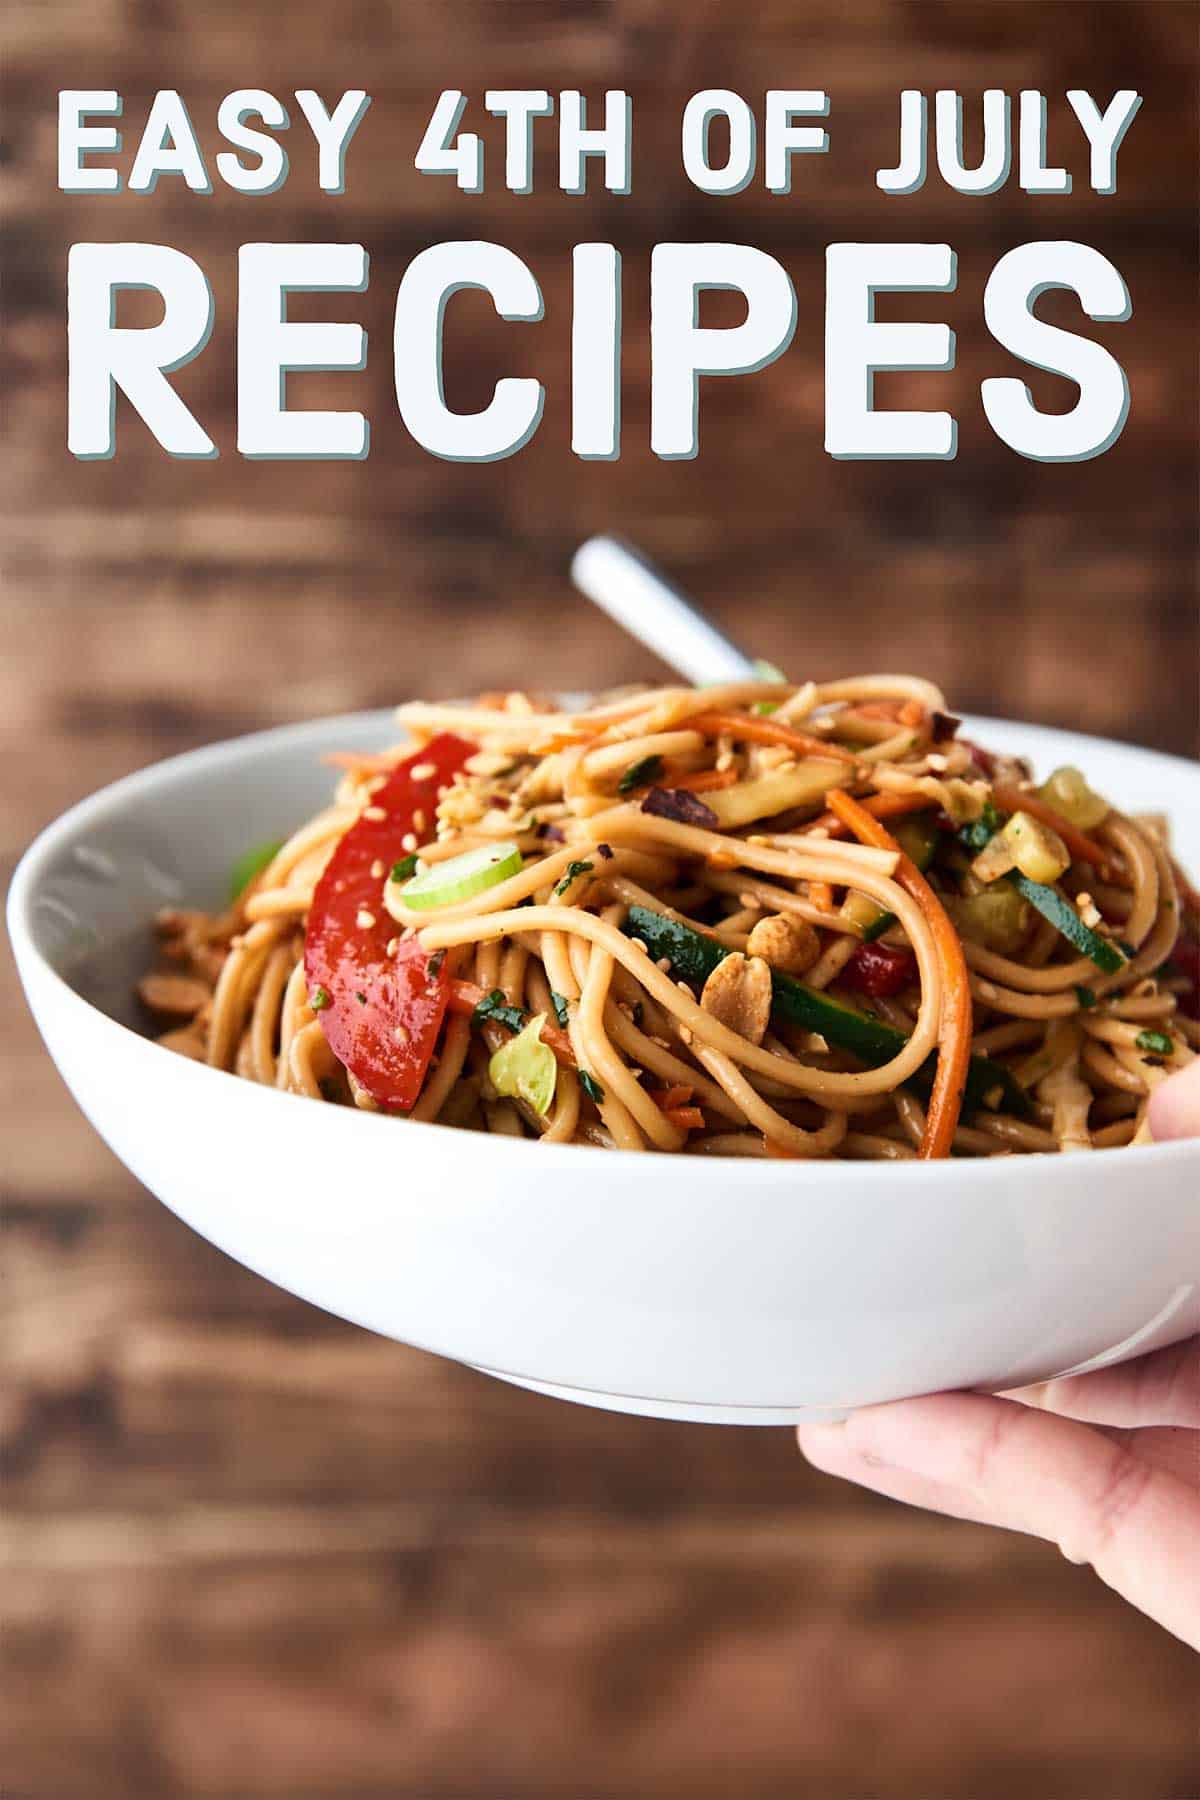 Easy 4th of July Recipes! Everything from snacks/sides/apps –> the BEST pasta salads –> main dishes –> desserts and drinks! showmetheyummy.com #4thofjuly #fourthofjuly #recipes #julyfourthrecipes #july4th #july4threcipes 